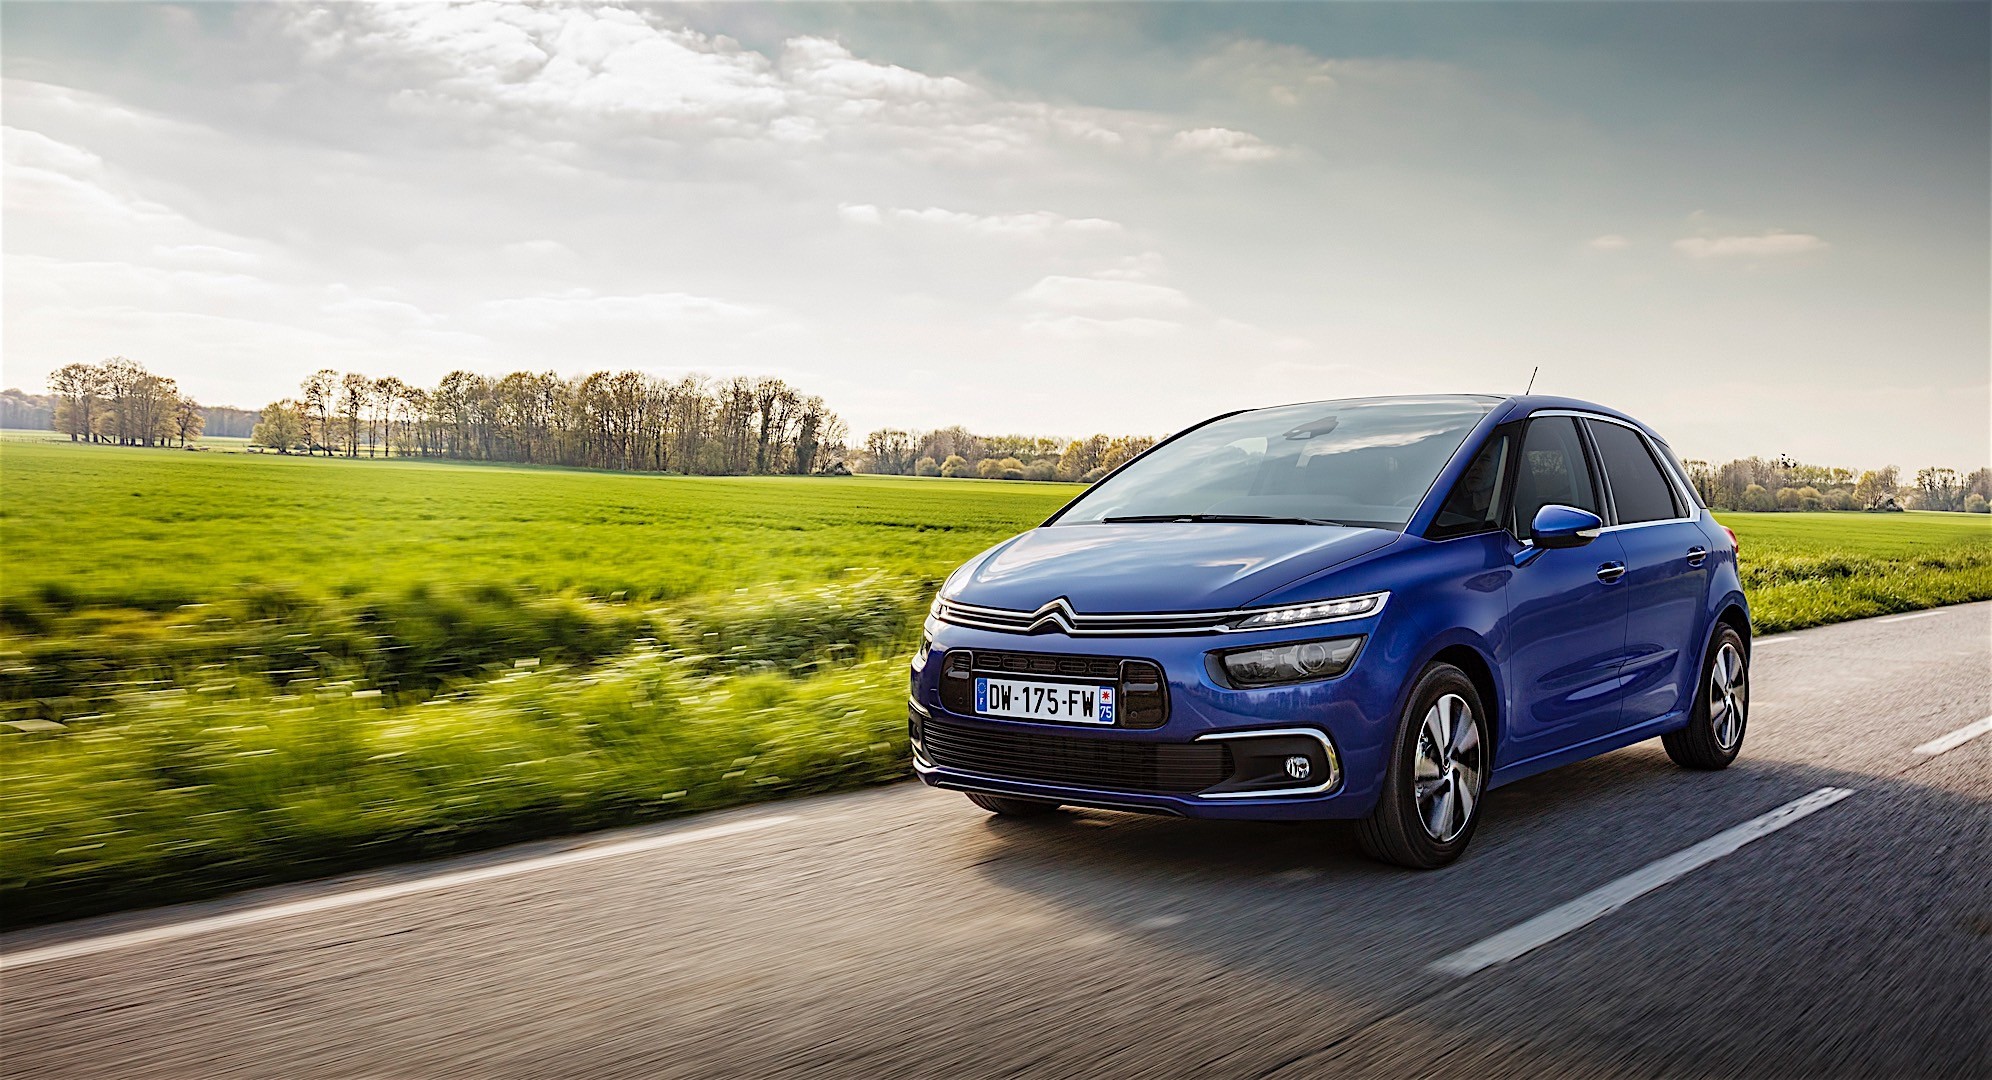 Citroën C4 Picasso at Perrys